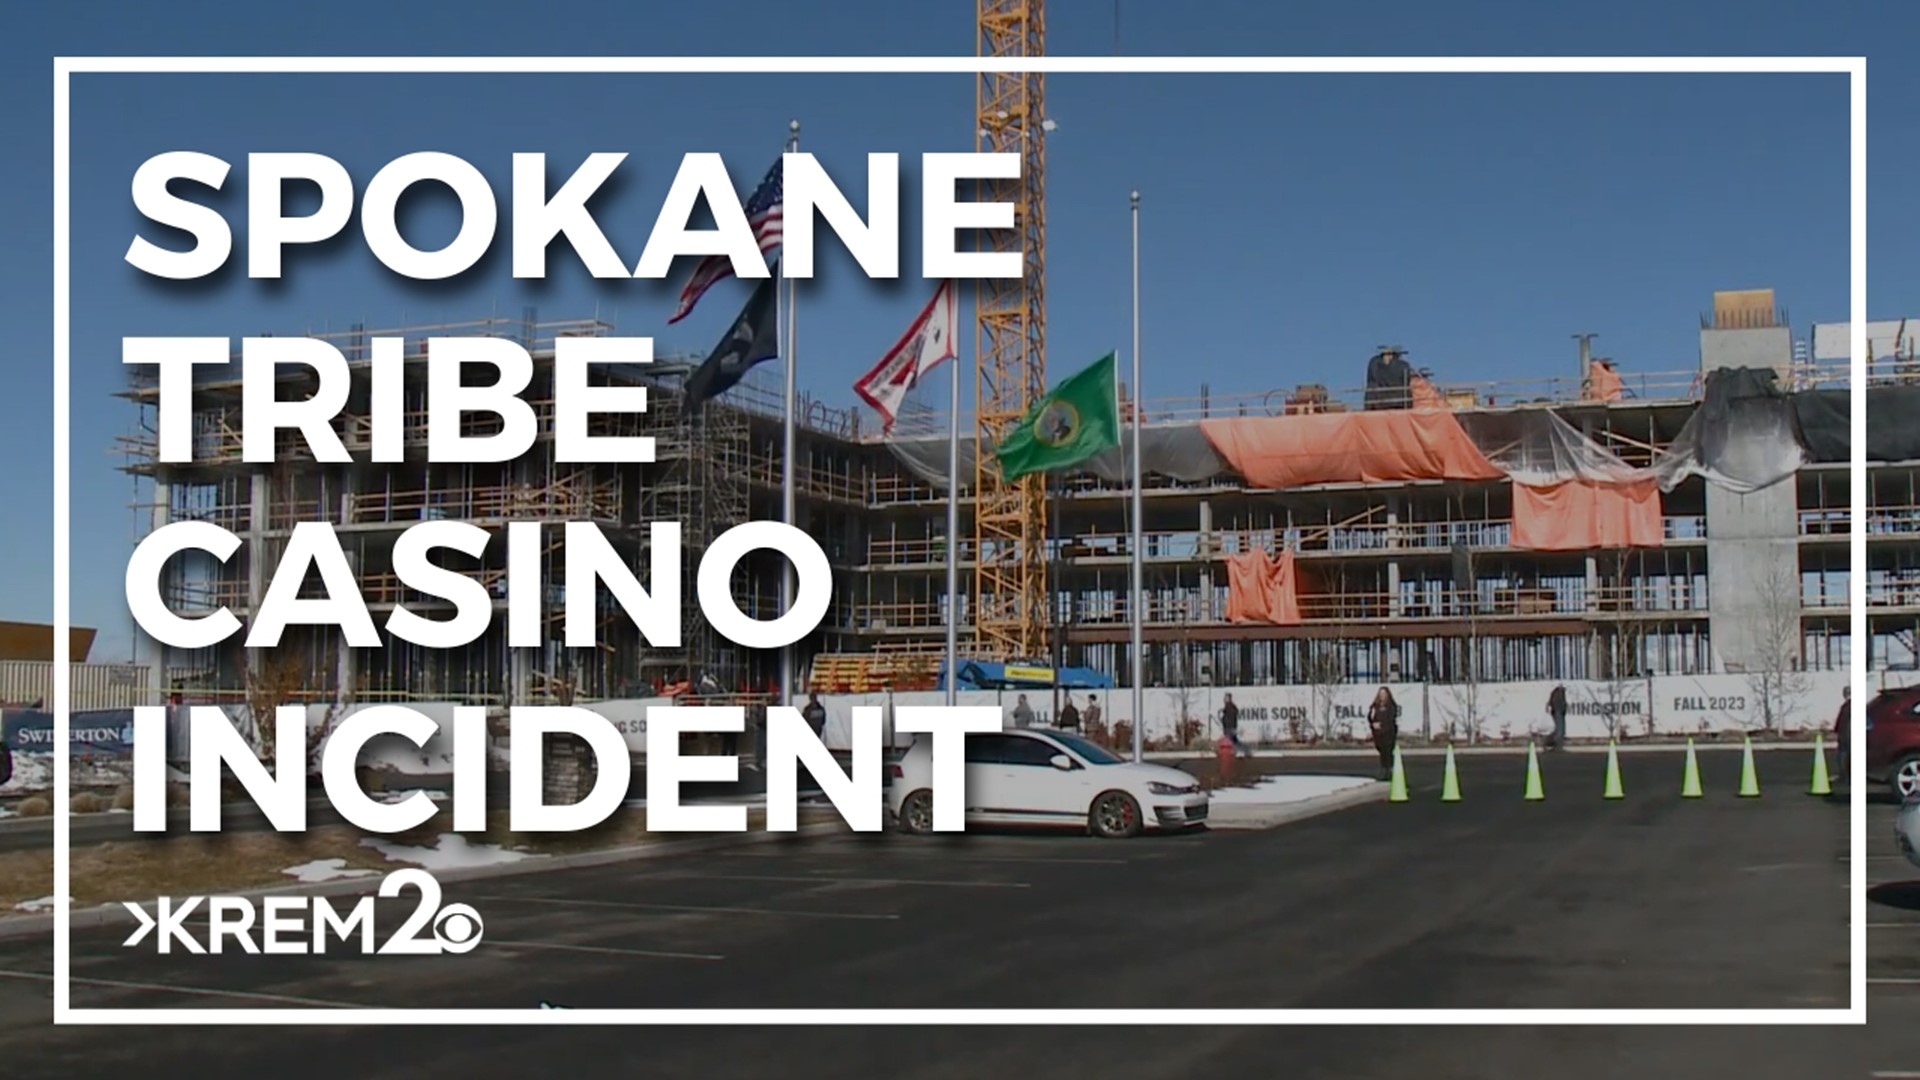 A major construction accident was reported near the casino. Police and other medical first responders are on site.